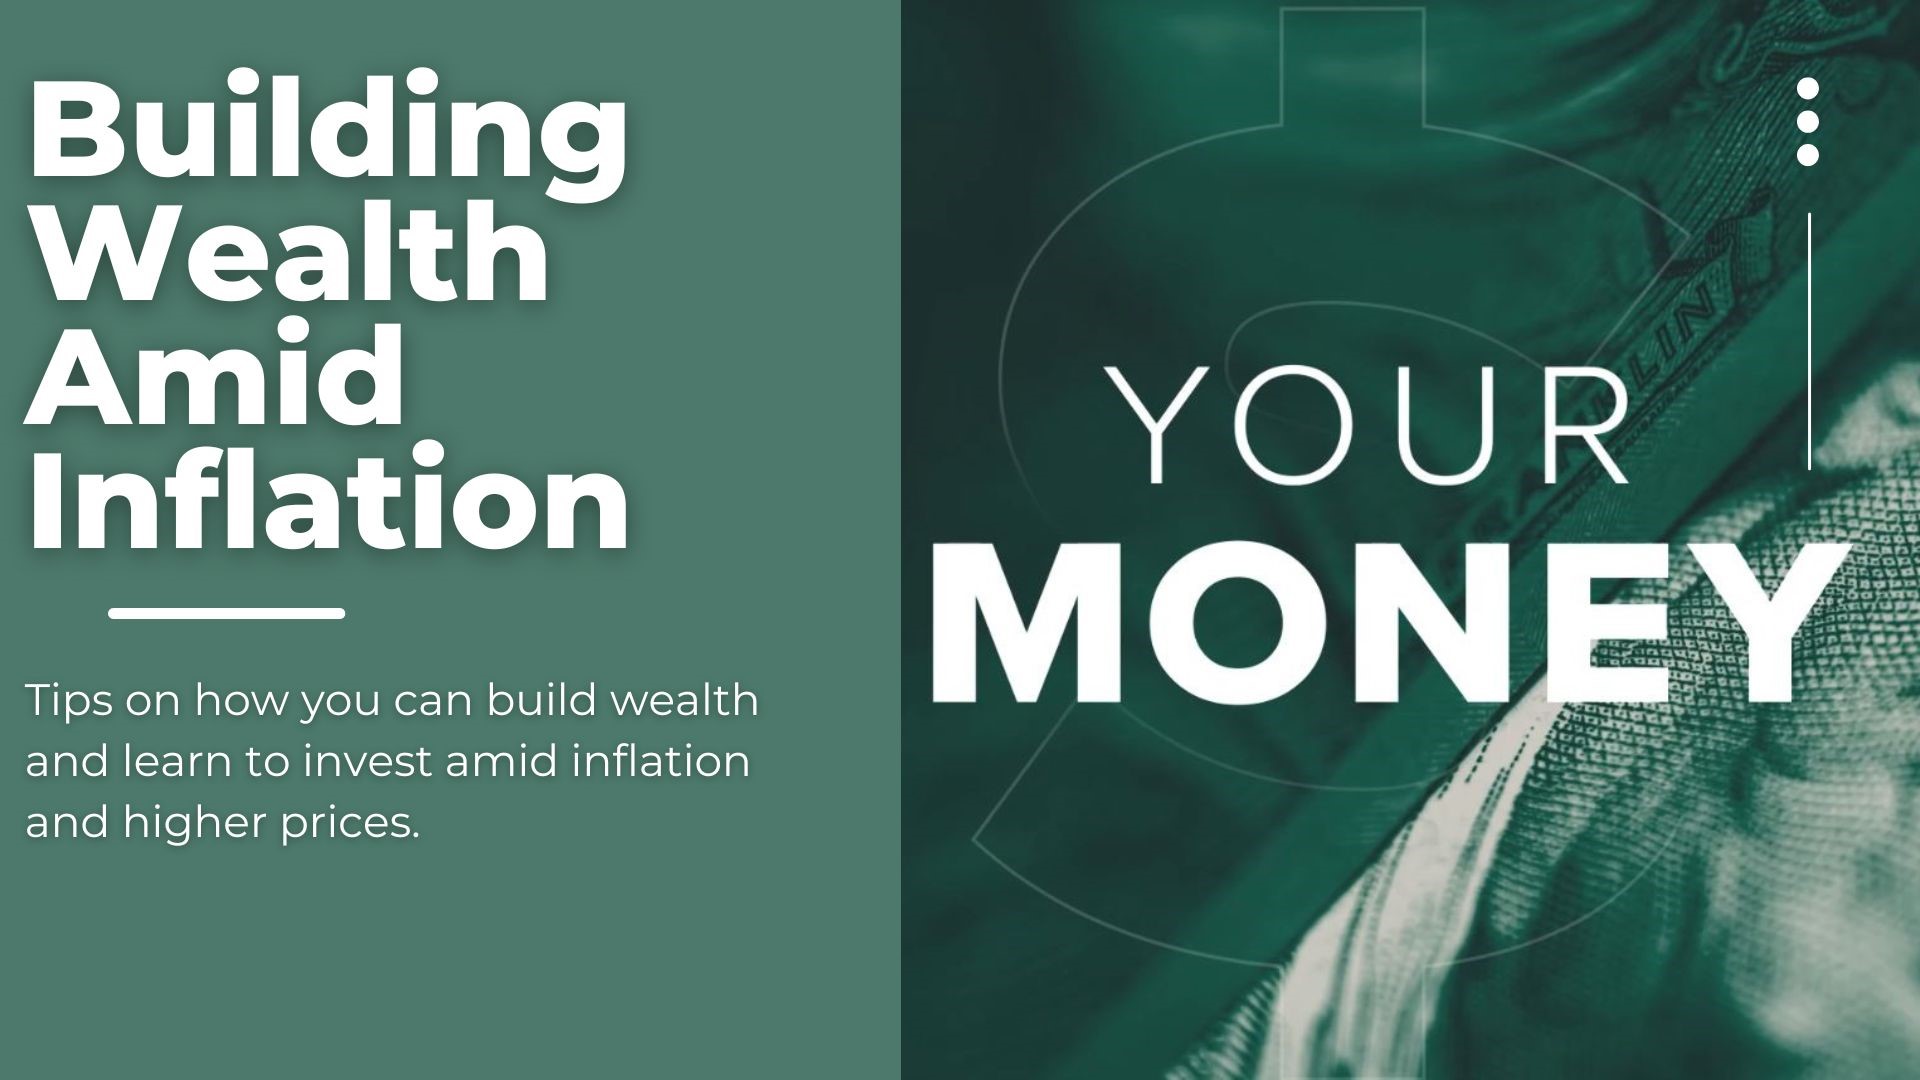 Looking at ways you can build wealth amid inflation, from tips on saving and budgeting to how to make smart investments.